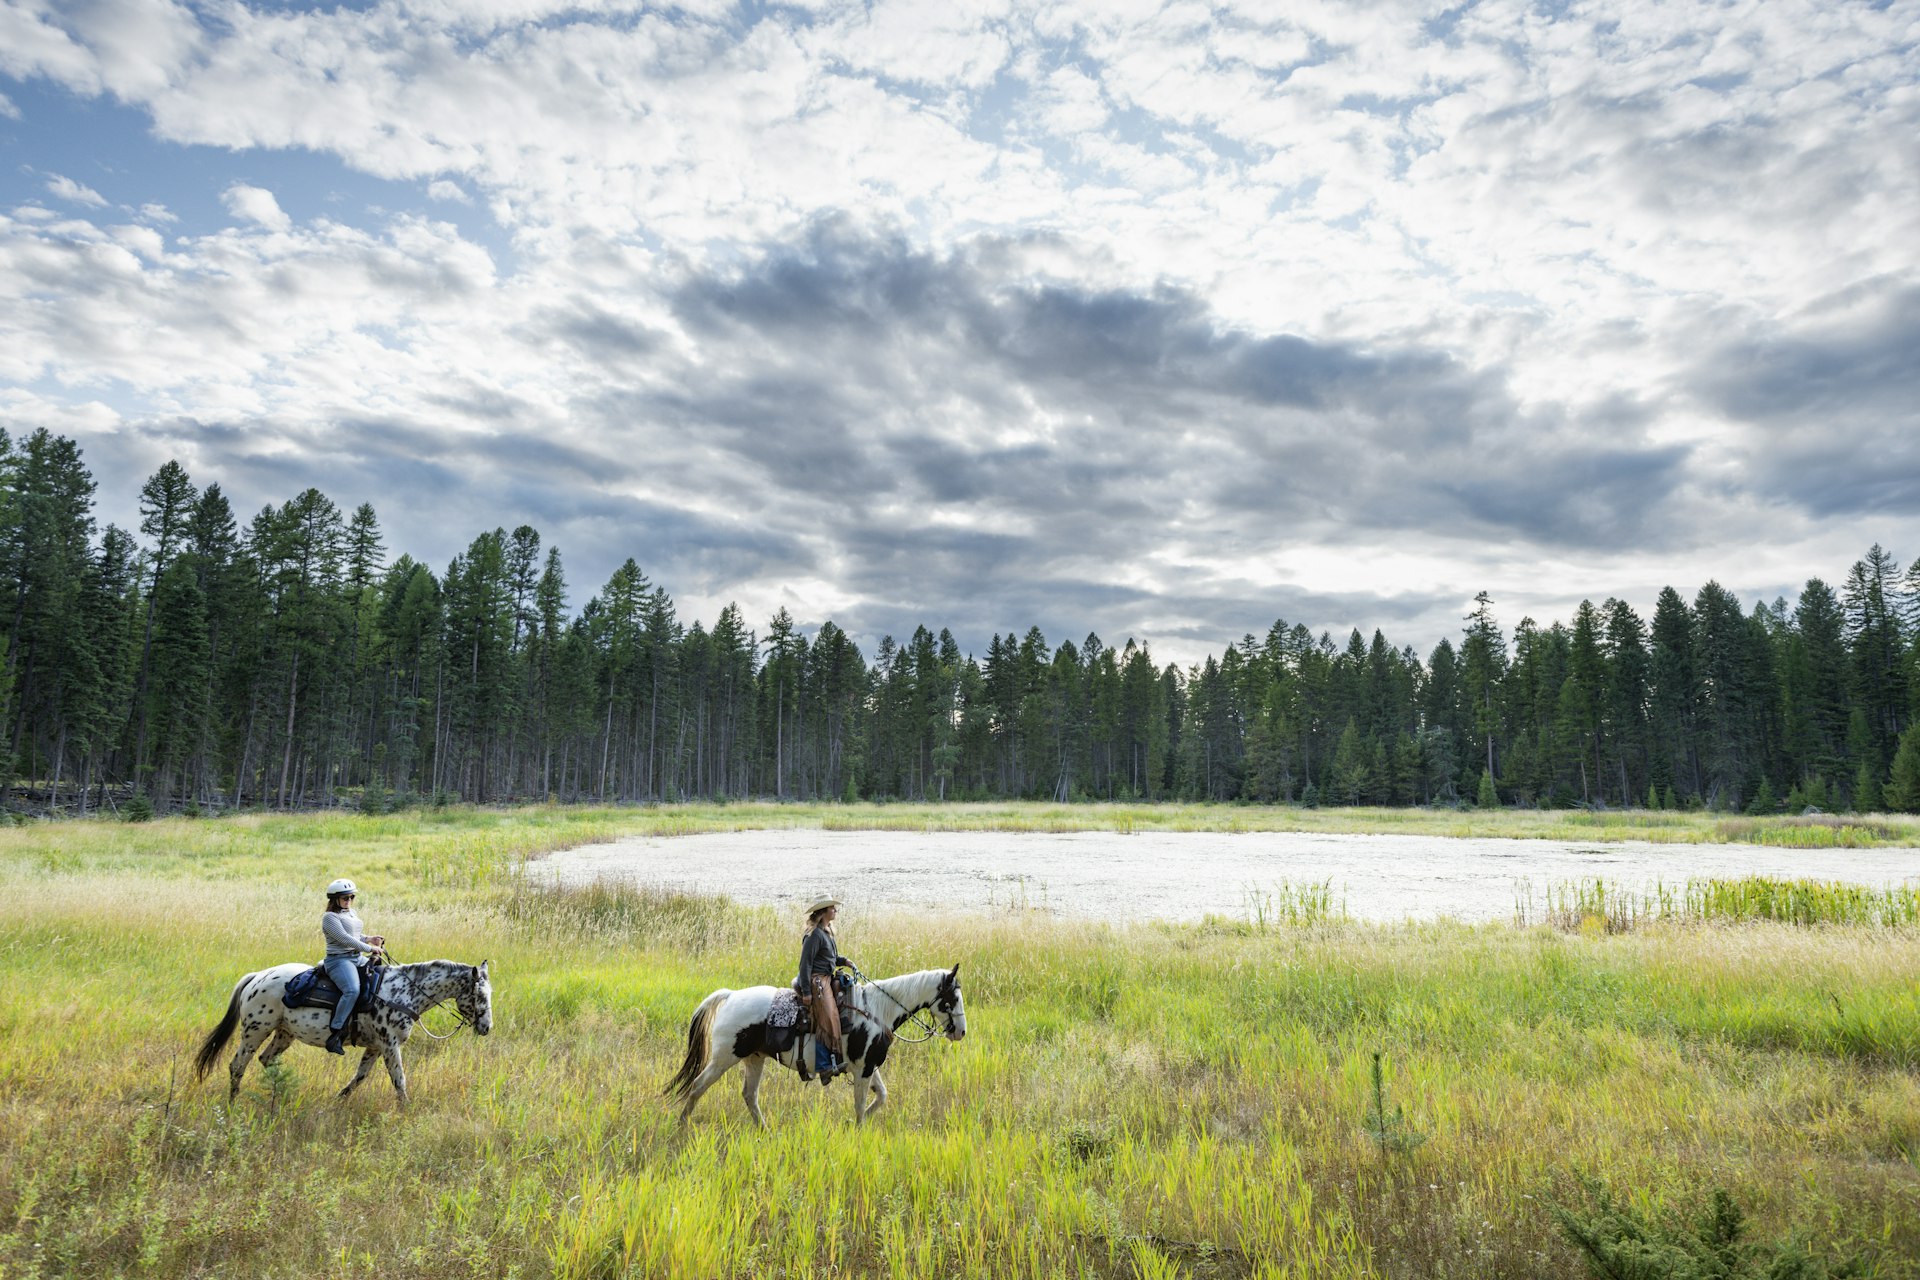 Horse riders in Montana by a lake